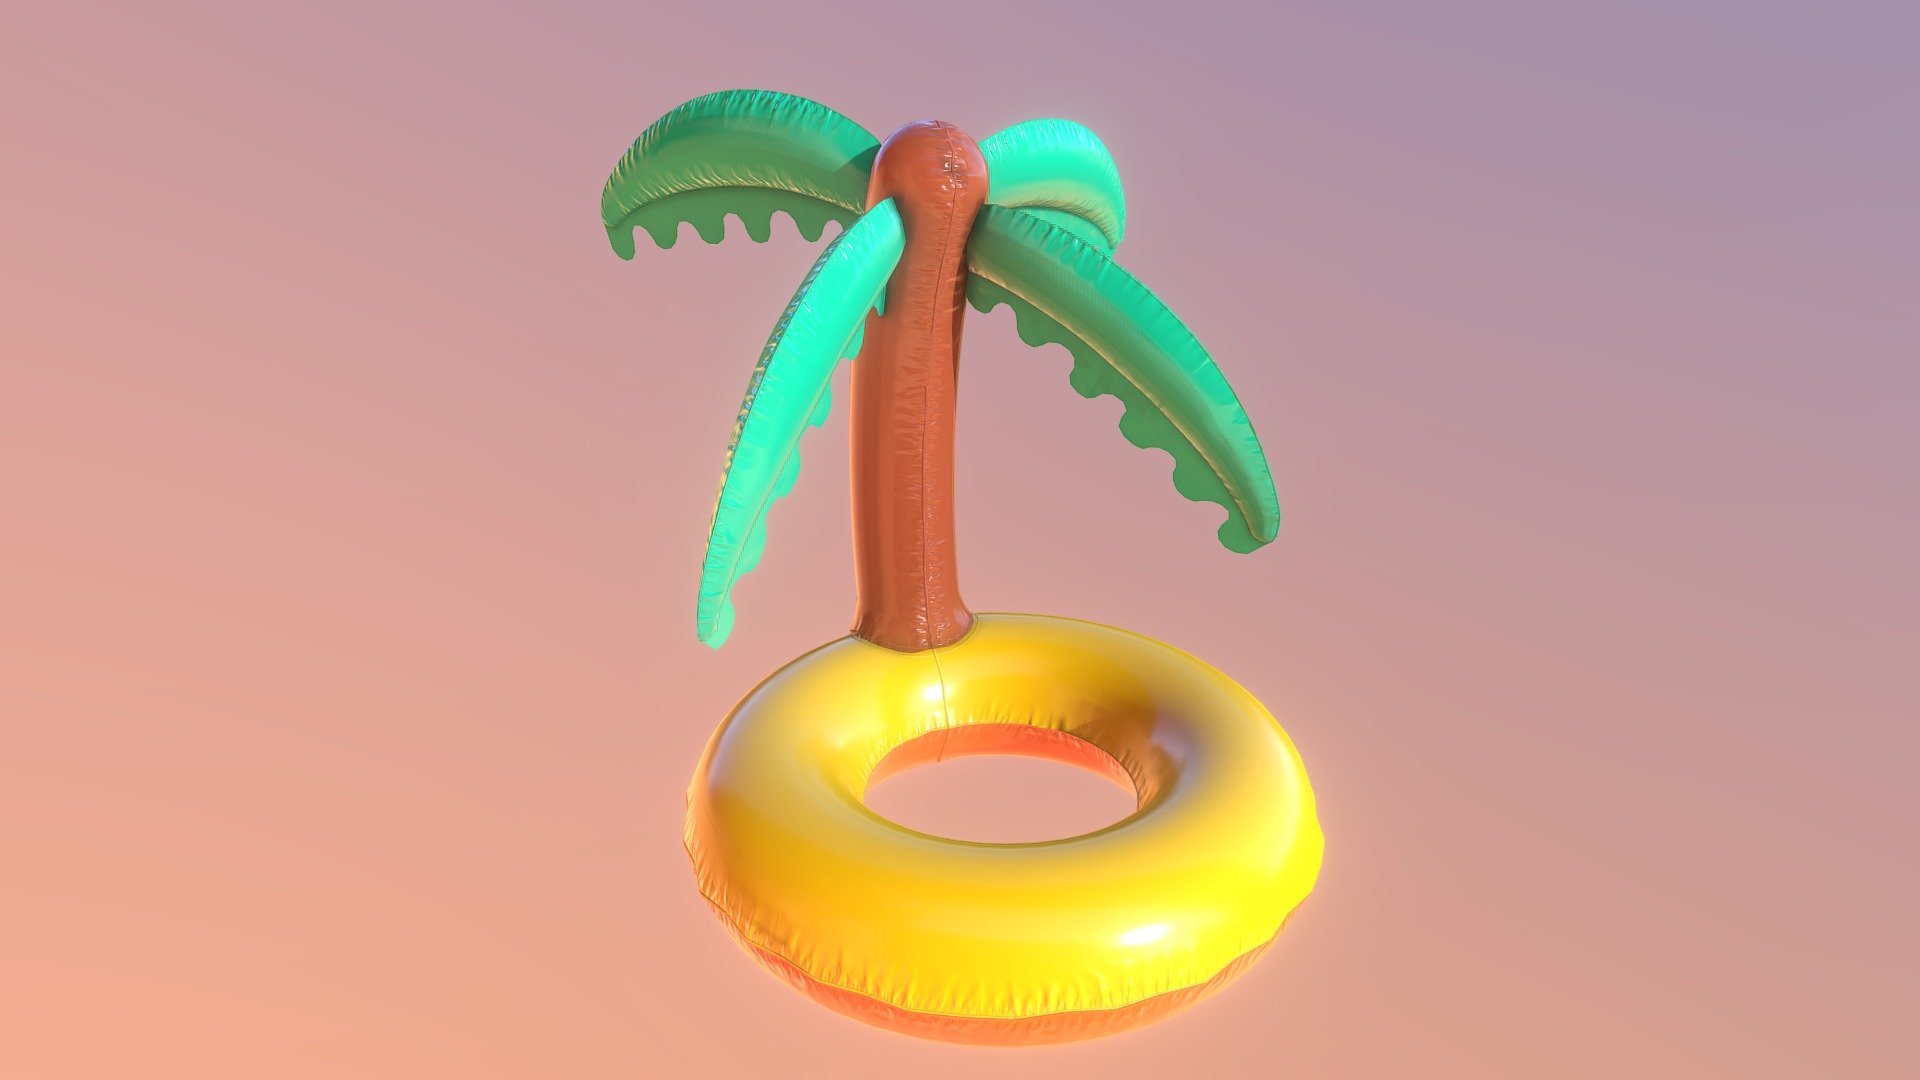 Medium poly inflatable blow-up pool floaty palm tree.

Props for https://www.spatial.io/s/Magical-Capsule-Critters-64a0c2312e4f7d91d959f94c on Spatial.io, a platform for authoring multi-player interactive 3D!  Follow me on Spatial.io https://www.spatial.io/@Unreality3D to play when we go live! - Inflatable Palm Tree - Buy Royalty Free 3D model by Laurie Annis (@laurieannis) 3d model